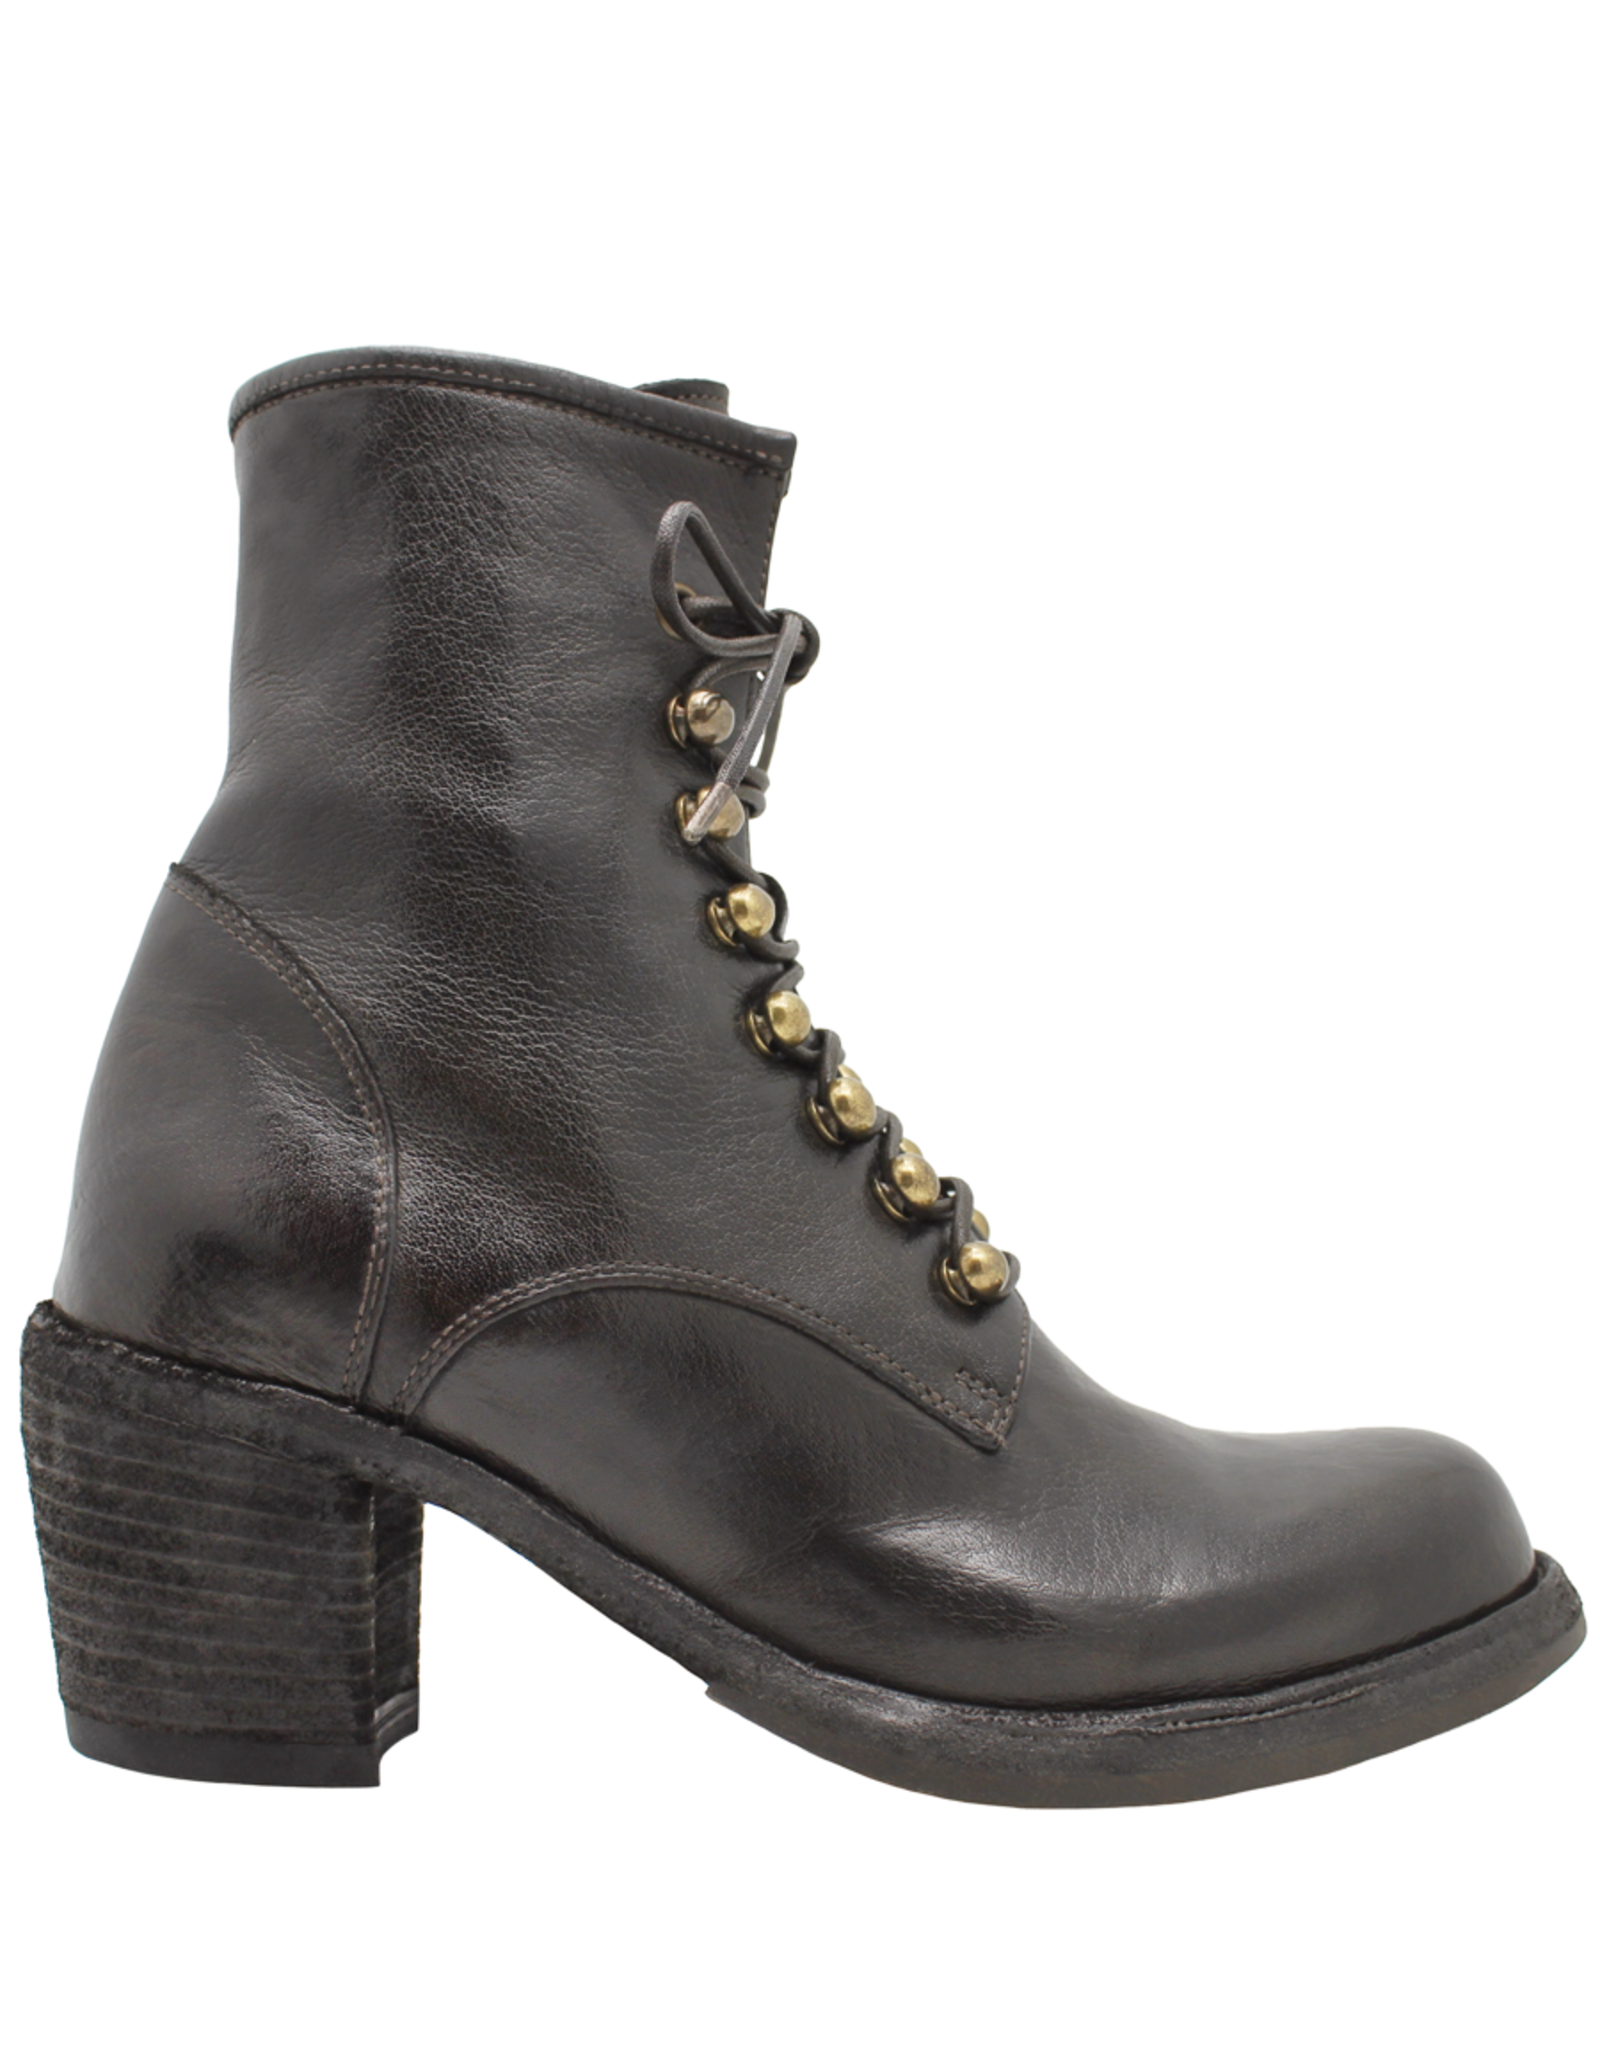 Officine Creative OfficineCreative Urban Chic Lace-Up Ankle Boot W/Zipper Agnes